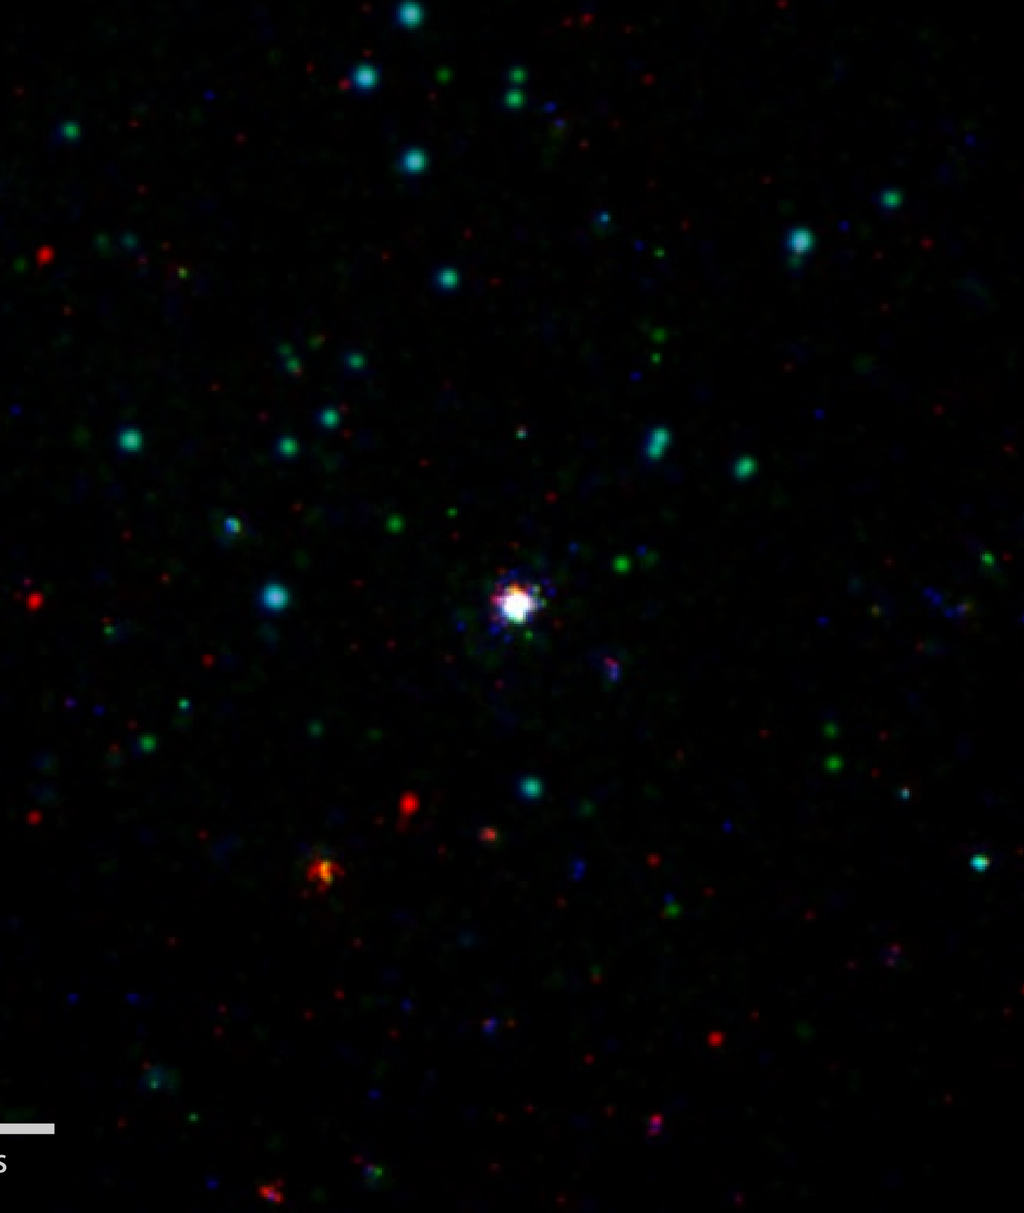 Labeled image. GRB 151027B, Swift's 1,000th burst (center), is shown in this composite X-ray, ultraviolet and optical image. X-rays were captured by Swift's X-Ray Telescope, which began observing the field 3.4 minutes after the Burst Alert Telescope detected the blast. Swift's Ultraviolet/Optical Telescope (UVOT) began observations seven seconds later and faintly detected the burst in visible light. The image includes X-rays with energies from 300 to 6,000 electron volts, primarily from the burst, and lower-energy light seen through the UVOT's visible, blue and ultraviolet filters (shown, respectively, in red, green and blue). The image has a cumulative exposure of 10.4 hours.  Credit: NASA/Swift/Phil Evans, Univ. of Leicester